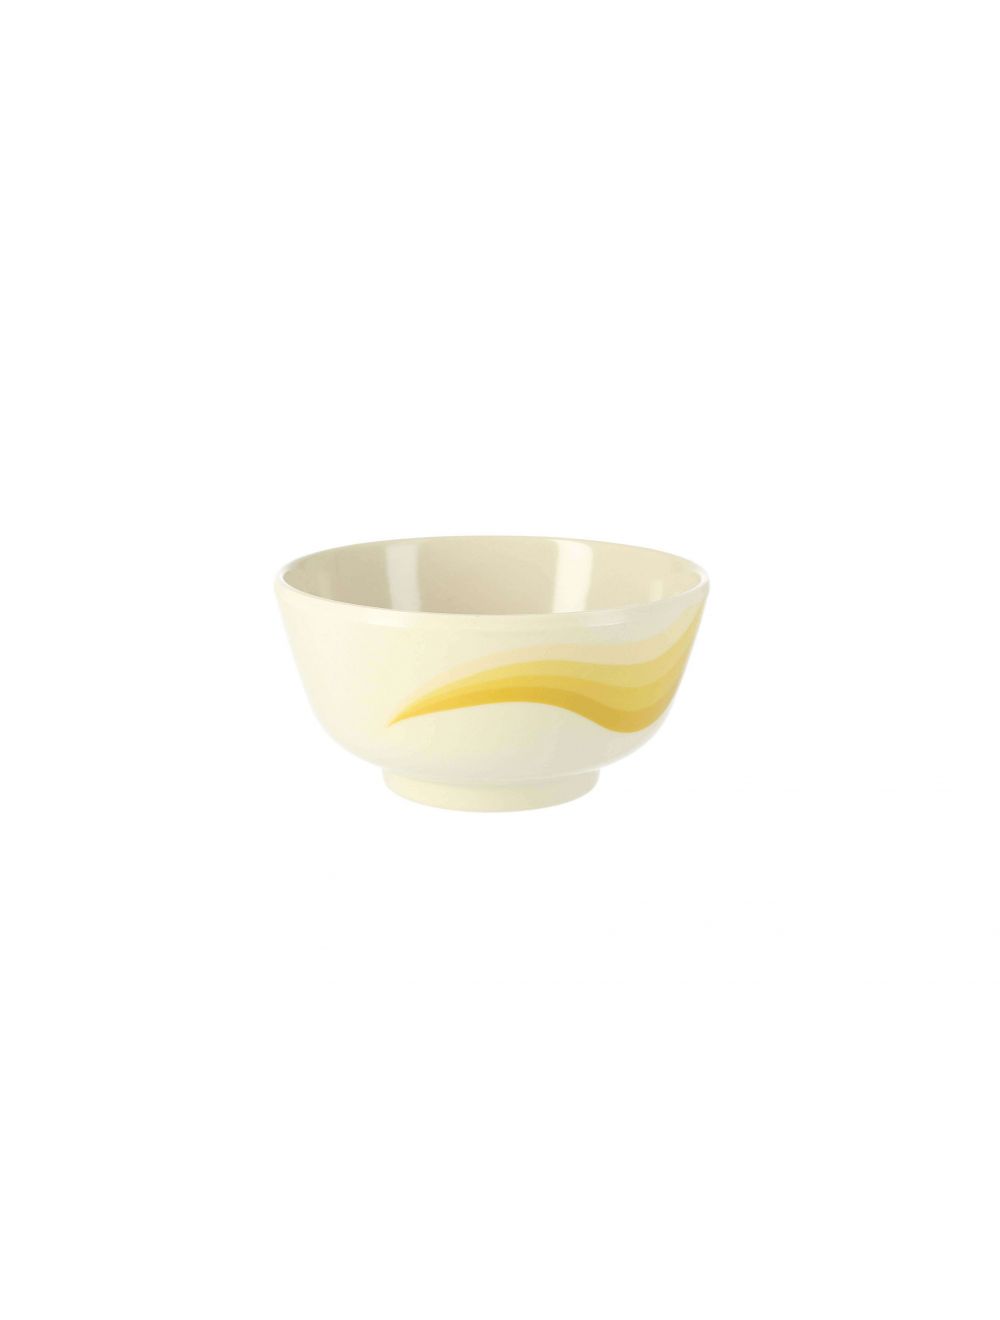 Royalford RF8048 Royalford 4.5" Melamine Ware Super Rays Round Bowl Portable Lightweight Bowl Breakfast Cereal